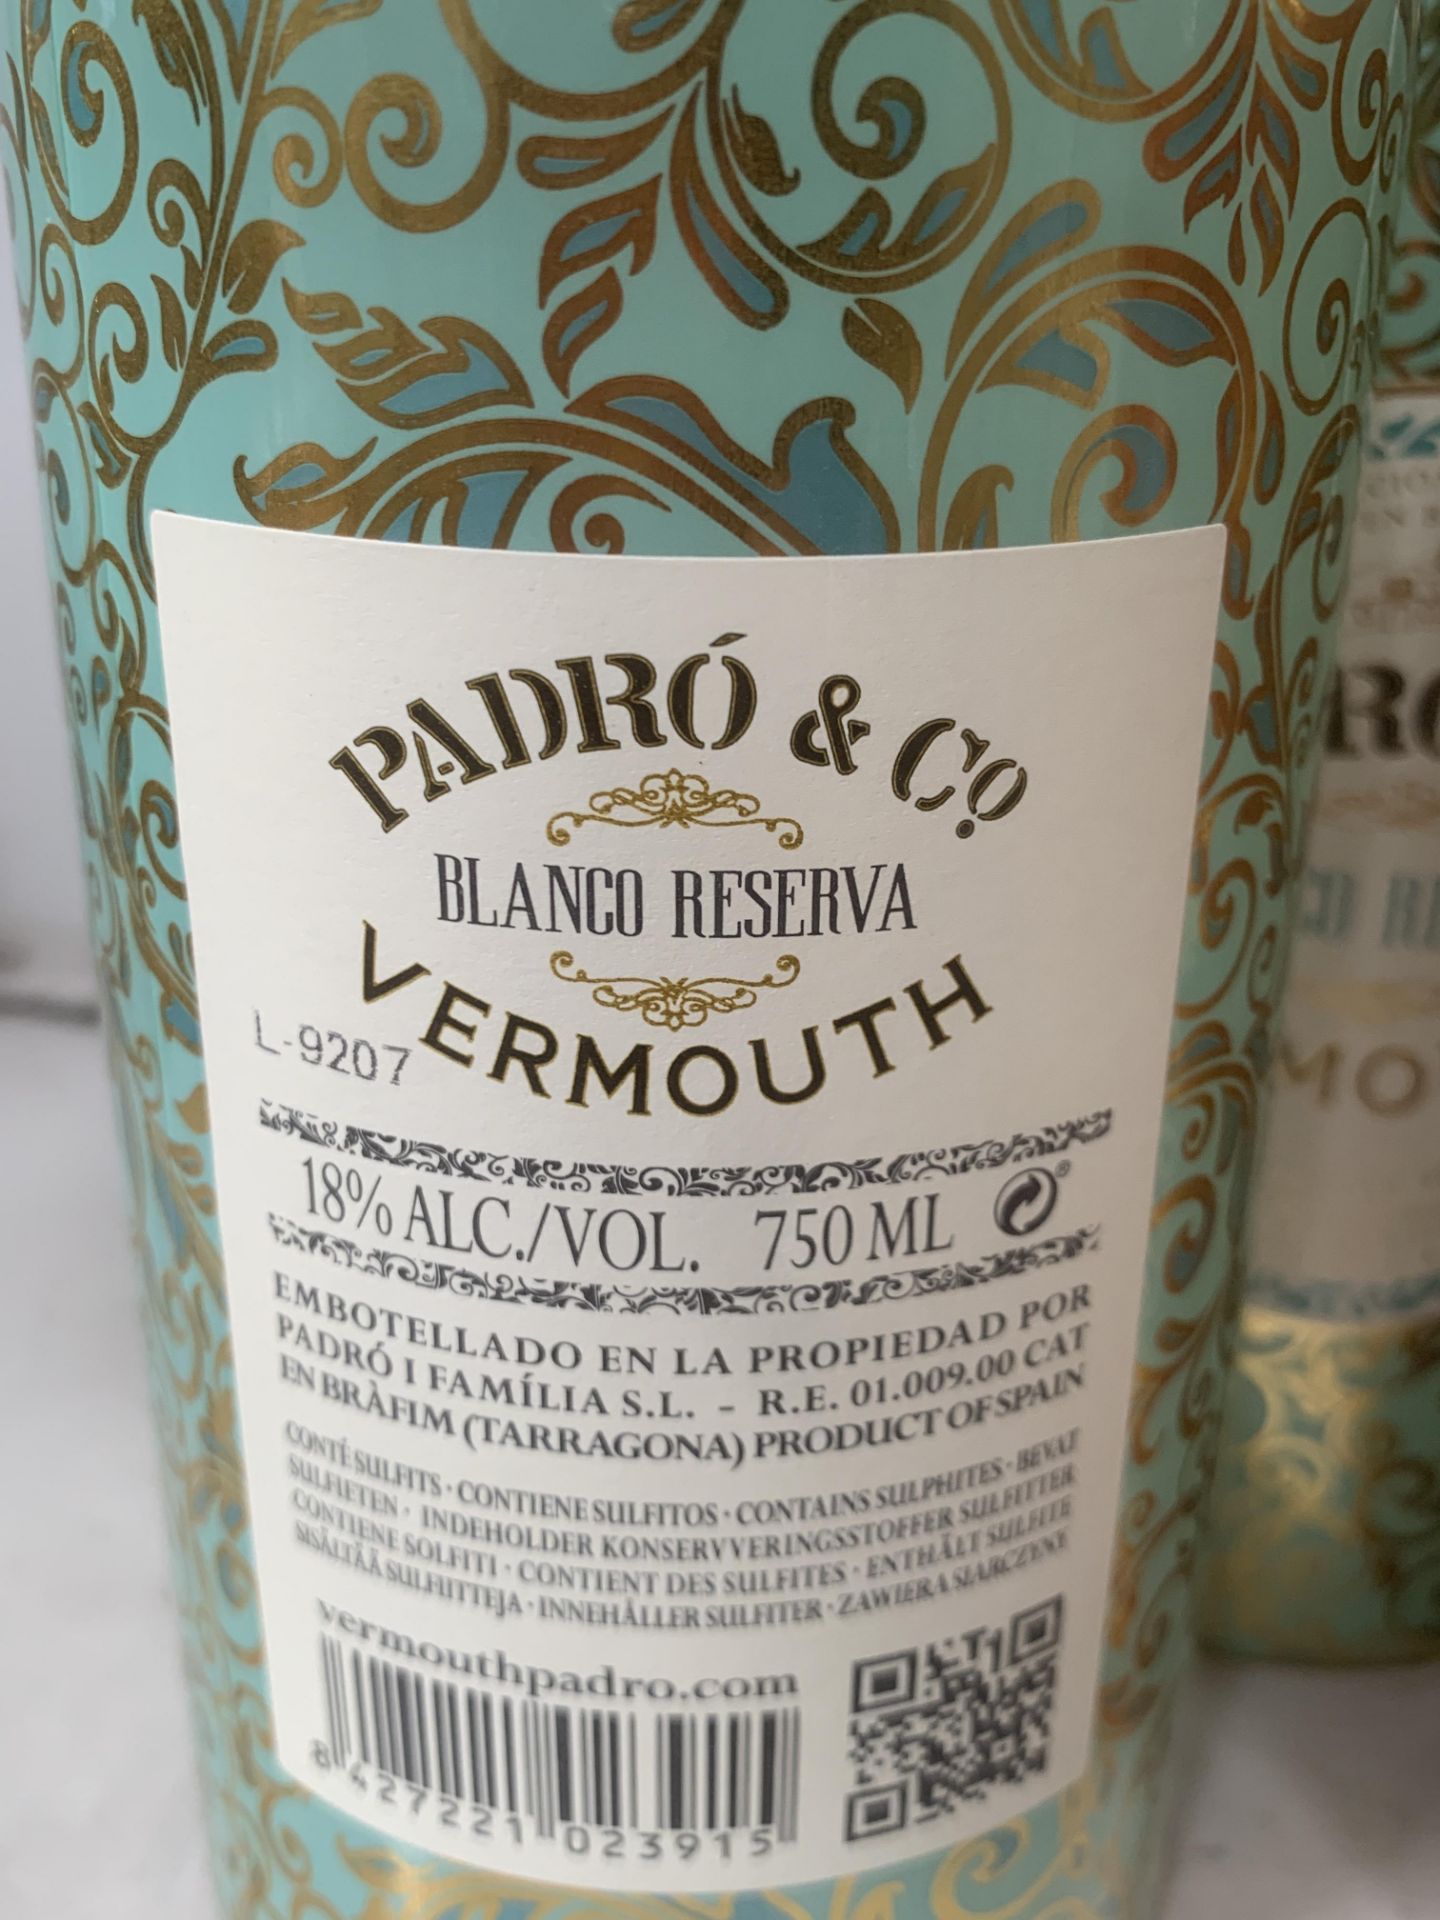 6x Padro & Co. Bottles of Vermouth; 4x Blanco Reserva 18%, 75cl and 2x Rojo Clasico 18%, 75cl - Image 5 of 5